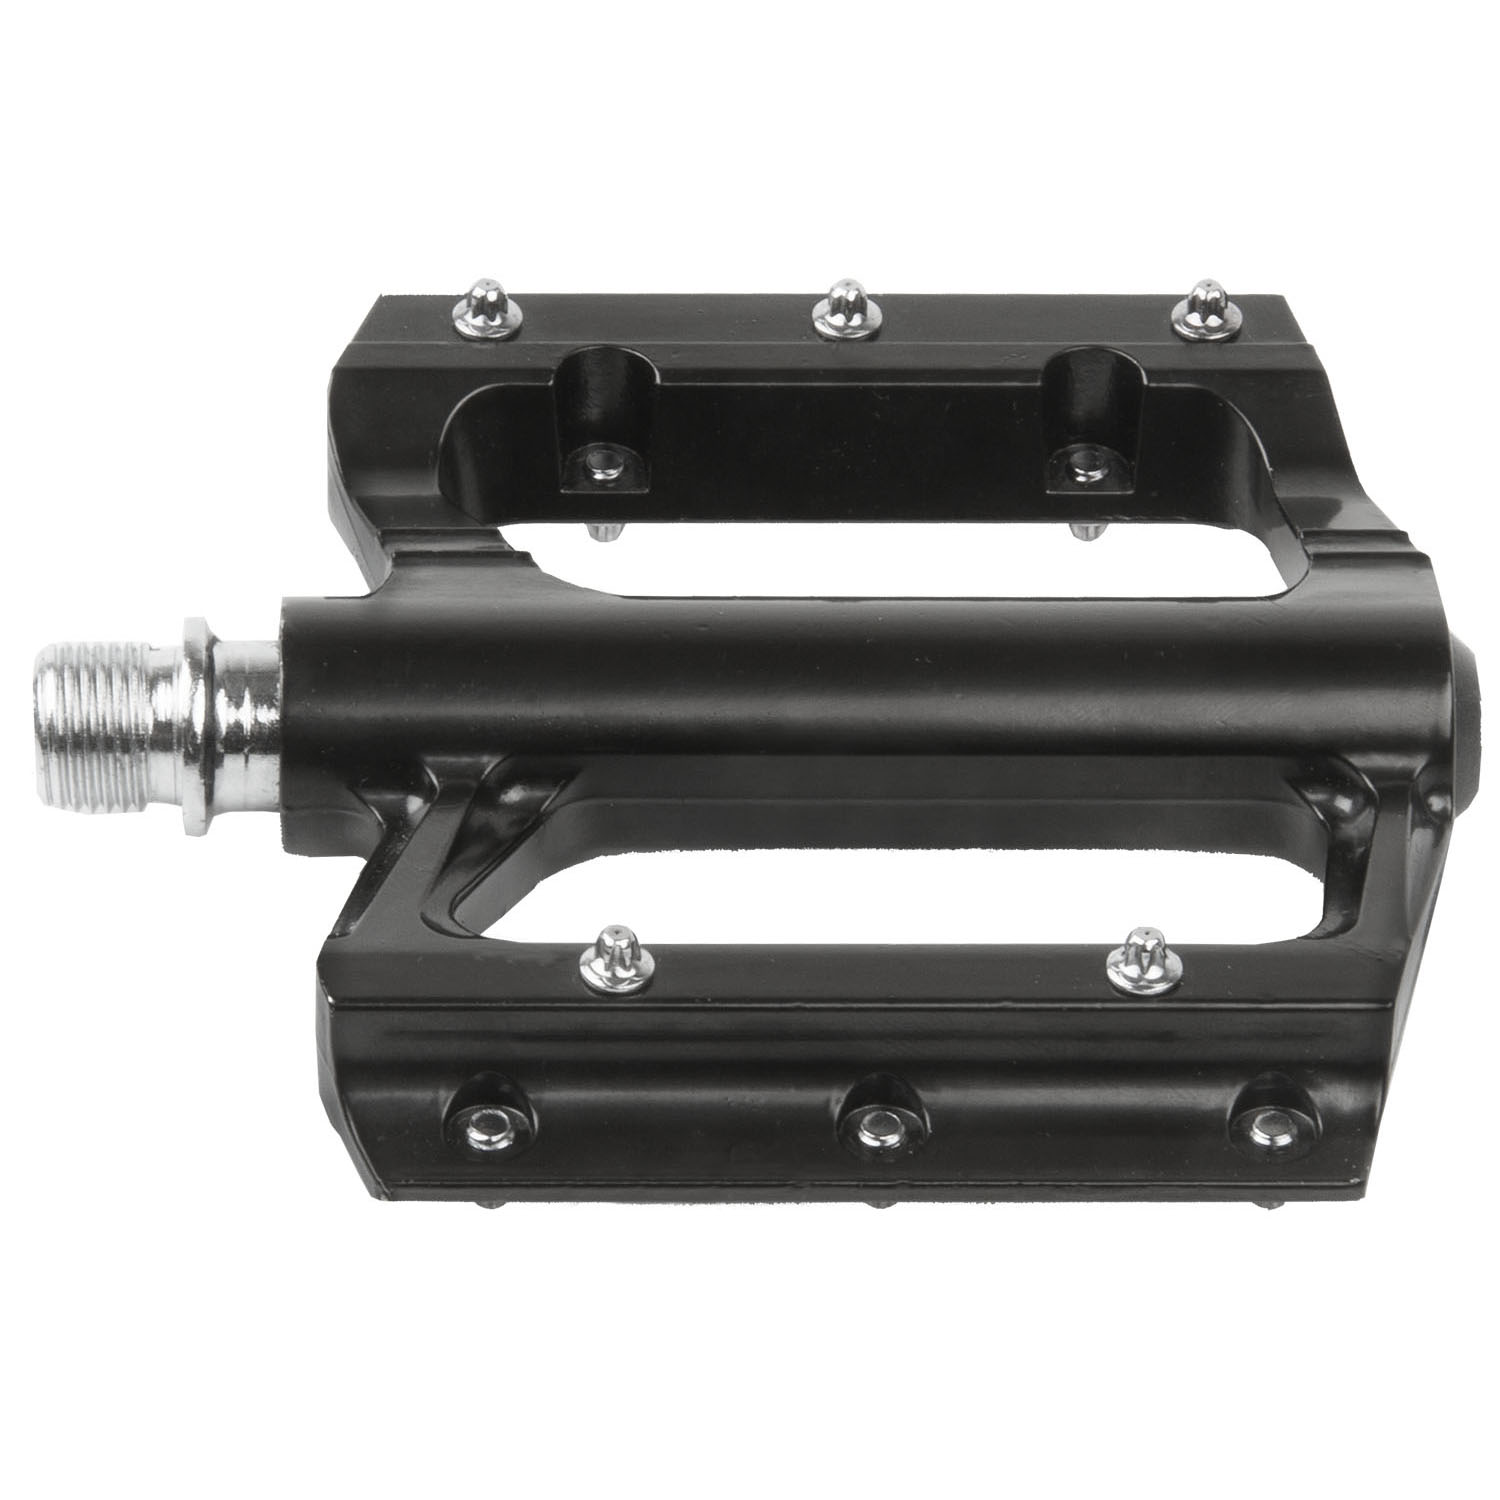 313315 – M-WAVE Flat flat pedal – AVAILABLE IN SELECTED BIKE SHOPS